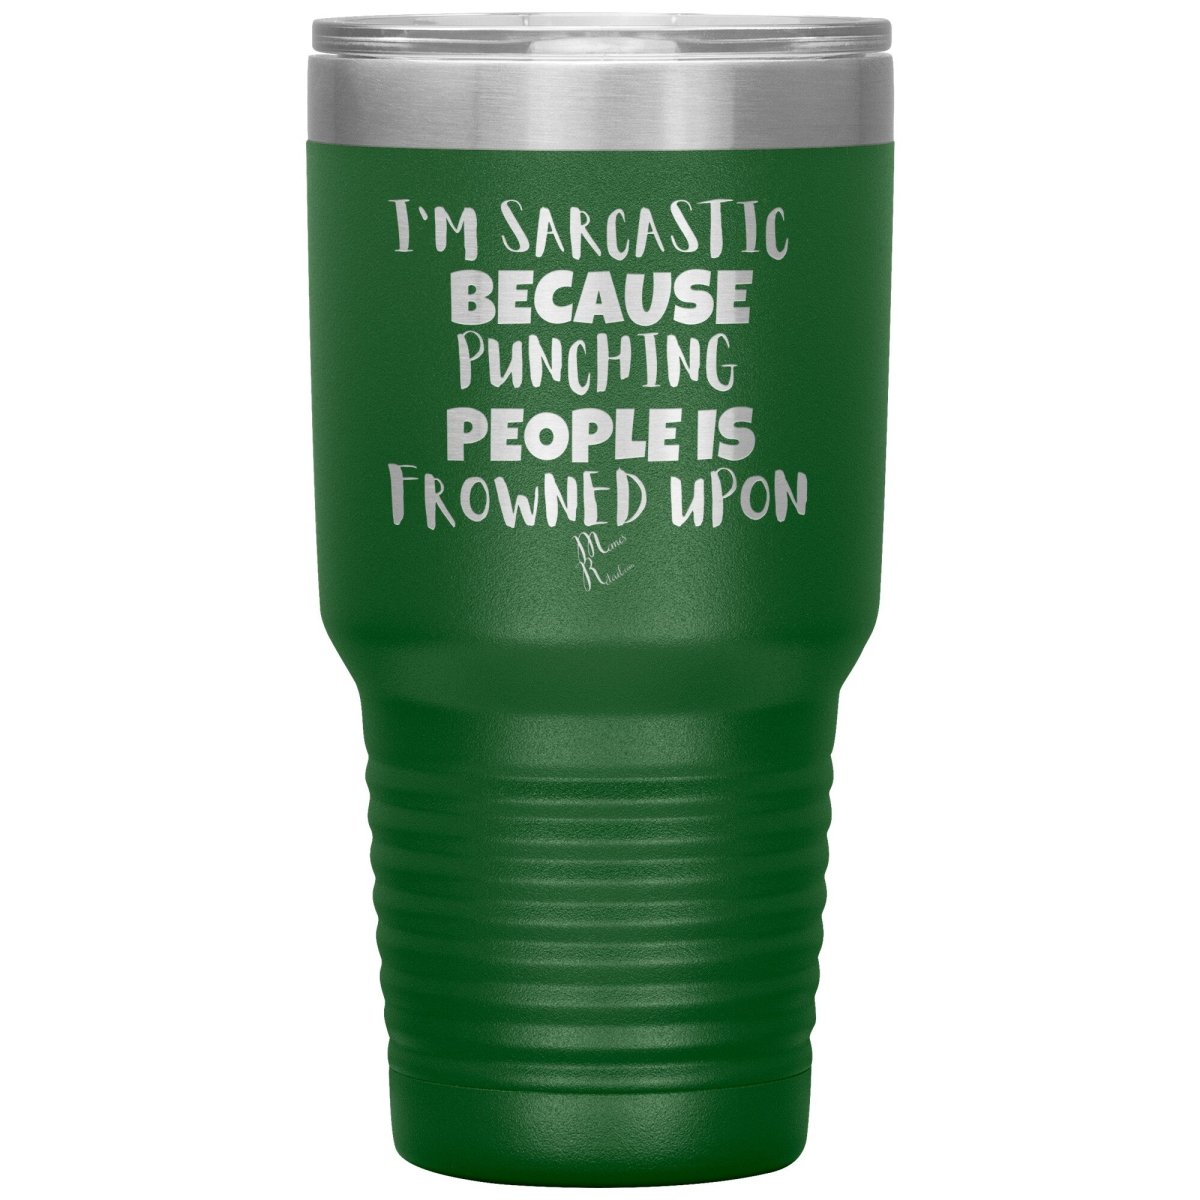 I'm Sarcastic Because Punching People is Frowned Upon Tumblers, 30oz Insulated Tumbler / Green - MemesRetail.com